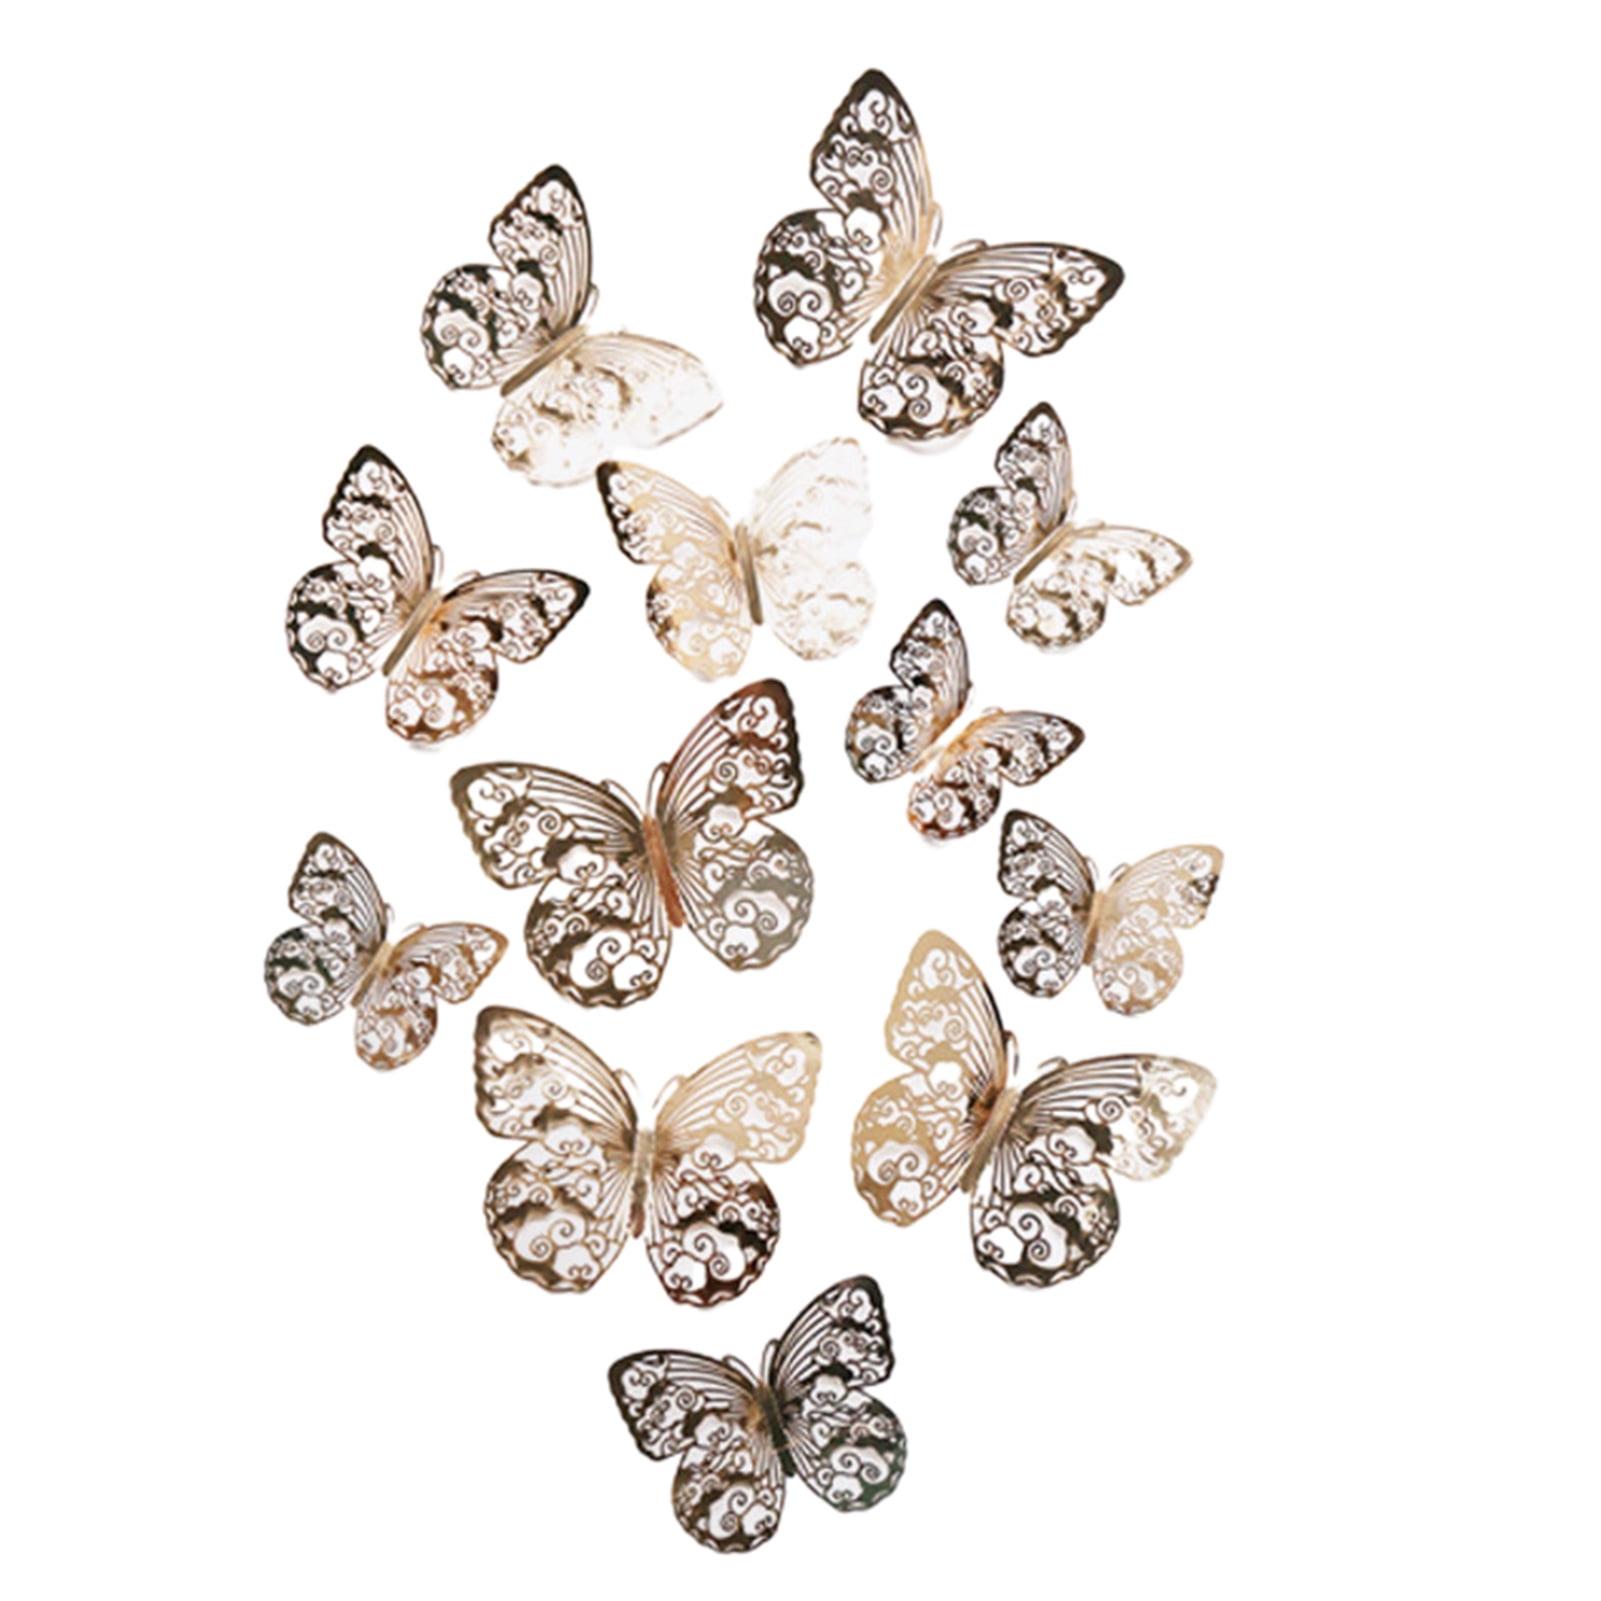 Details about   3D Butterfly Statue I3272 Wallpaper Mural Sefl-adhesive Removable Sticker Wendy 